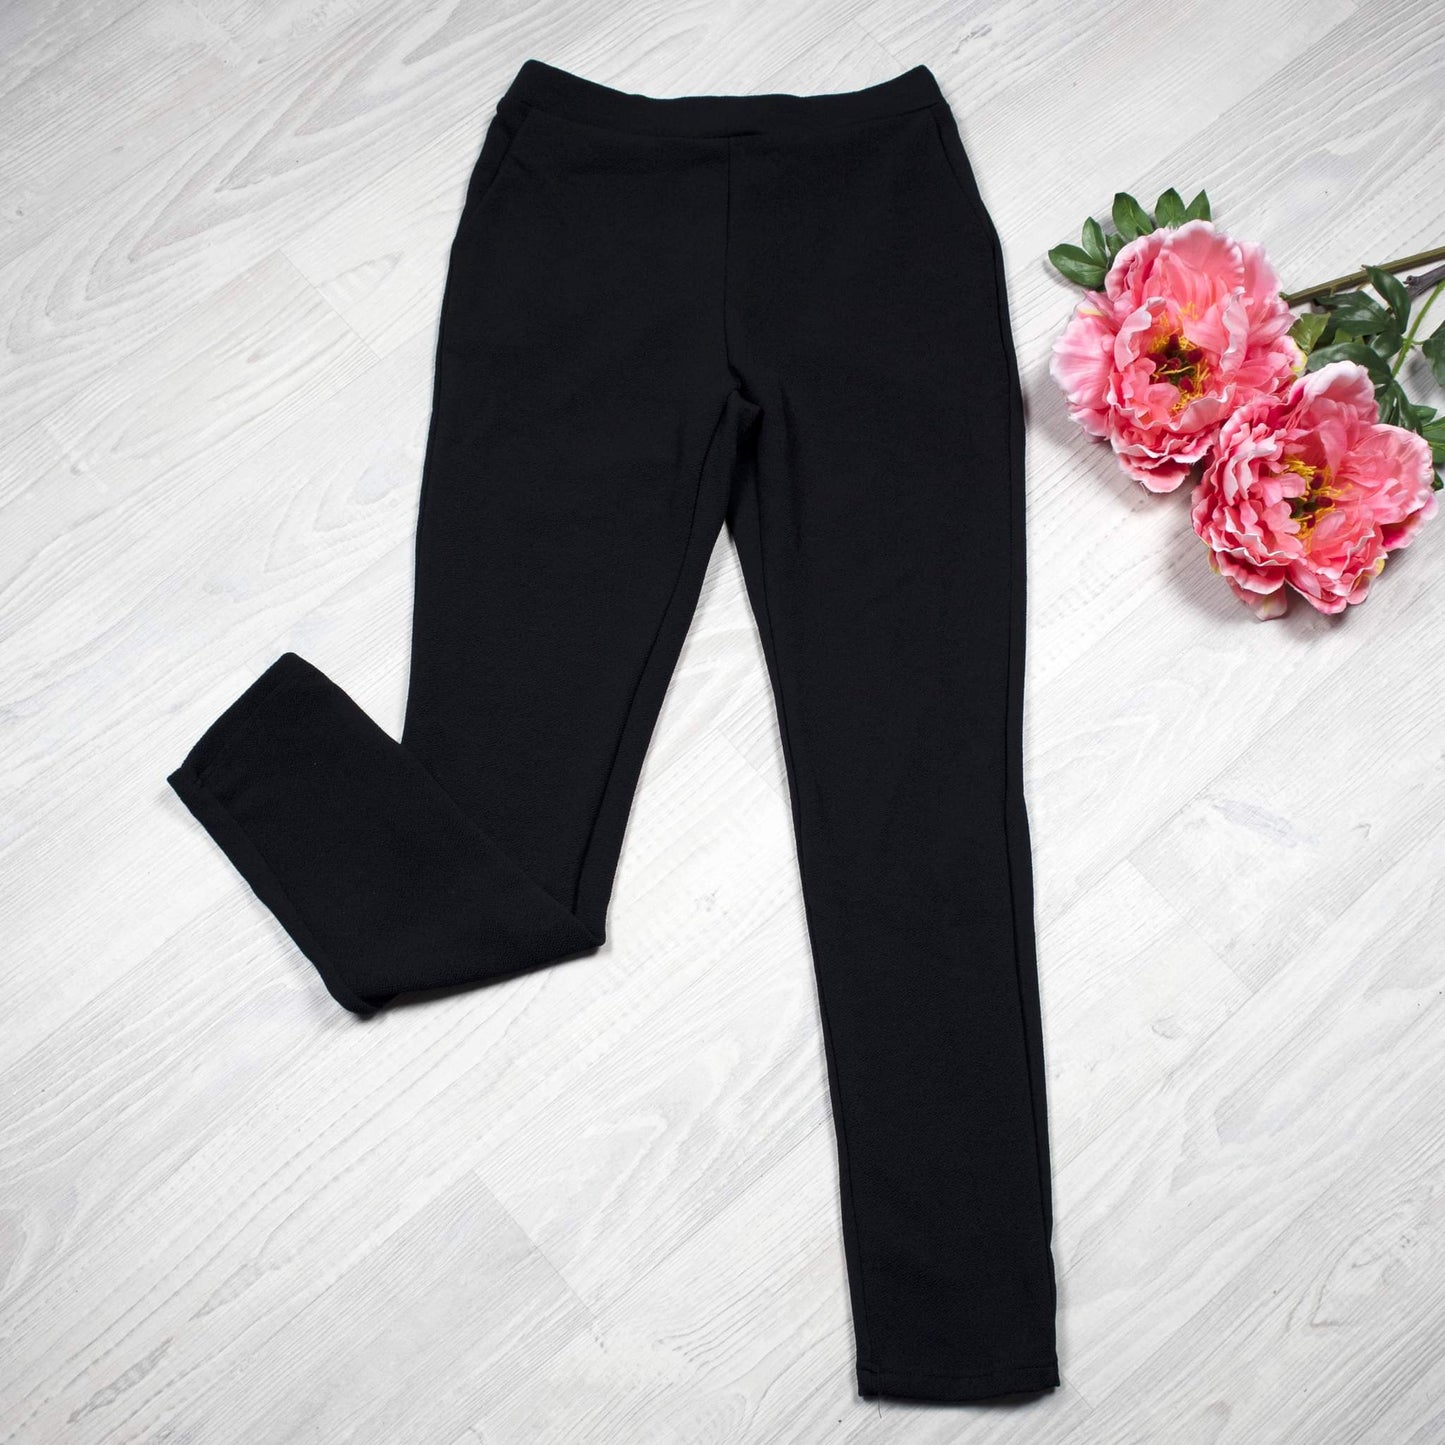 Stretchy Black Textured Pants